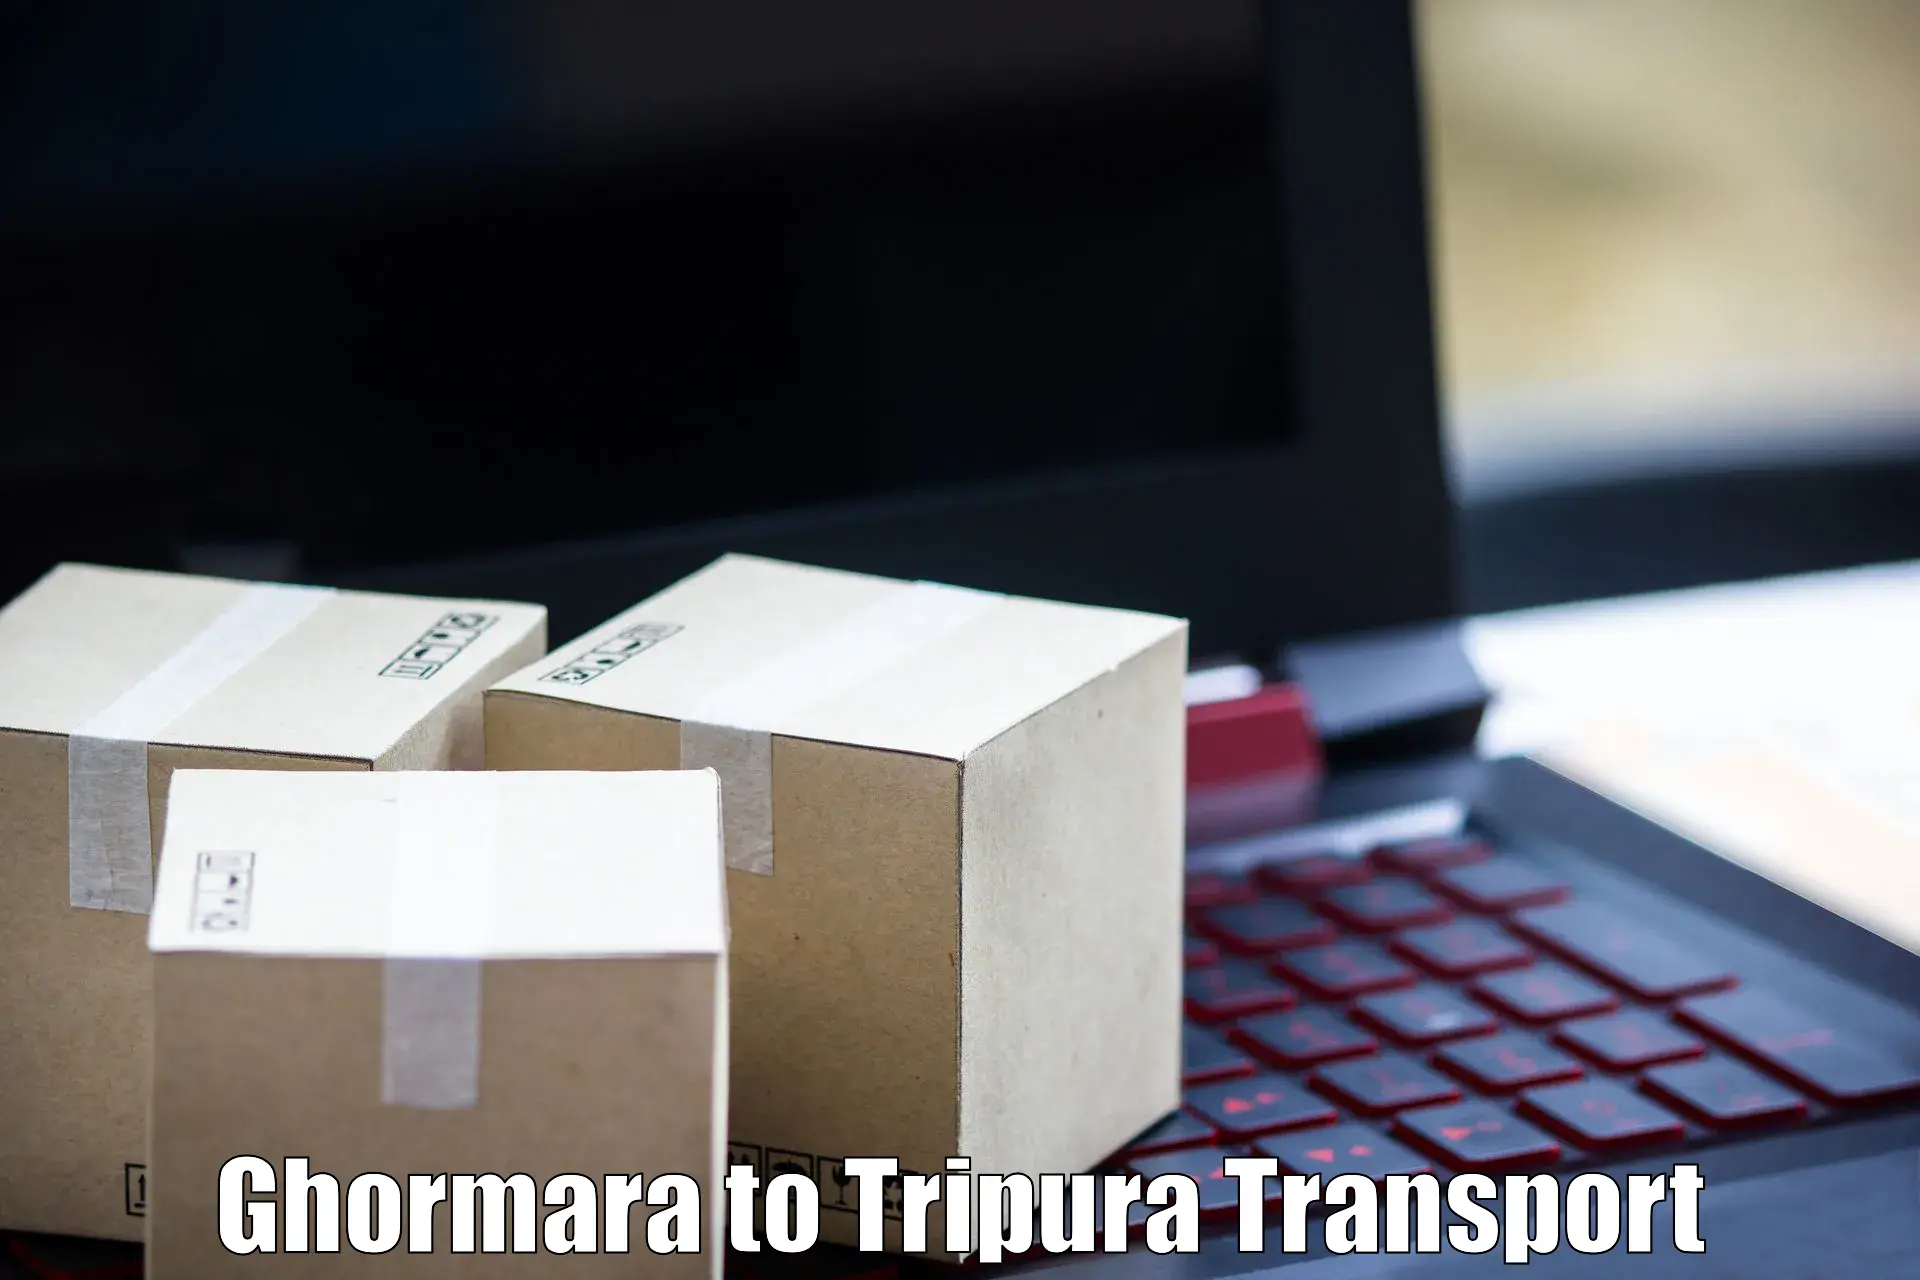 Express transport services in Ghormara to Udaipur Tripura